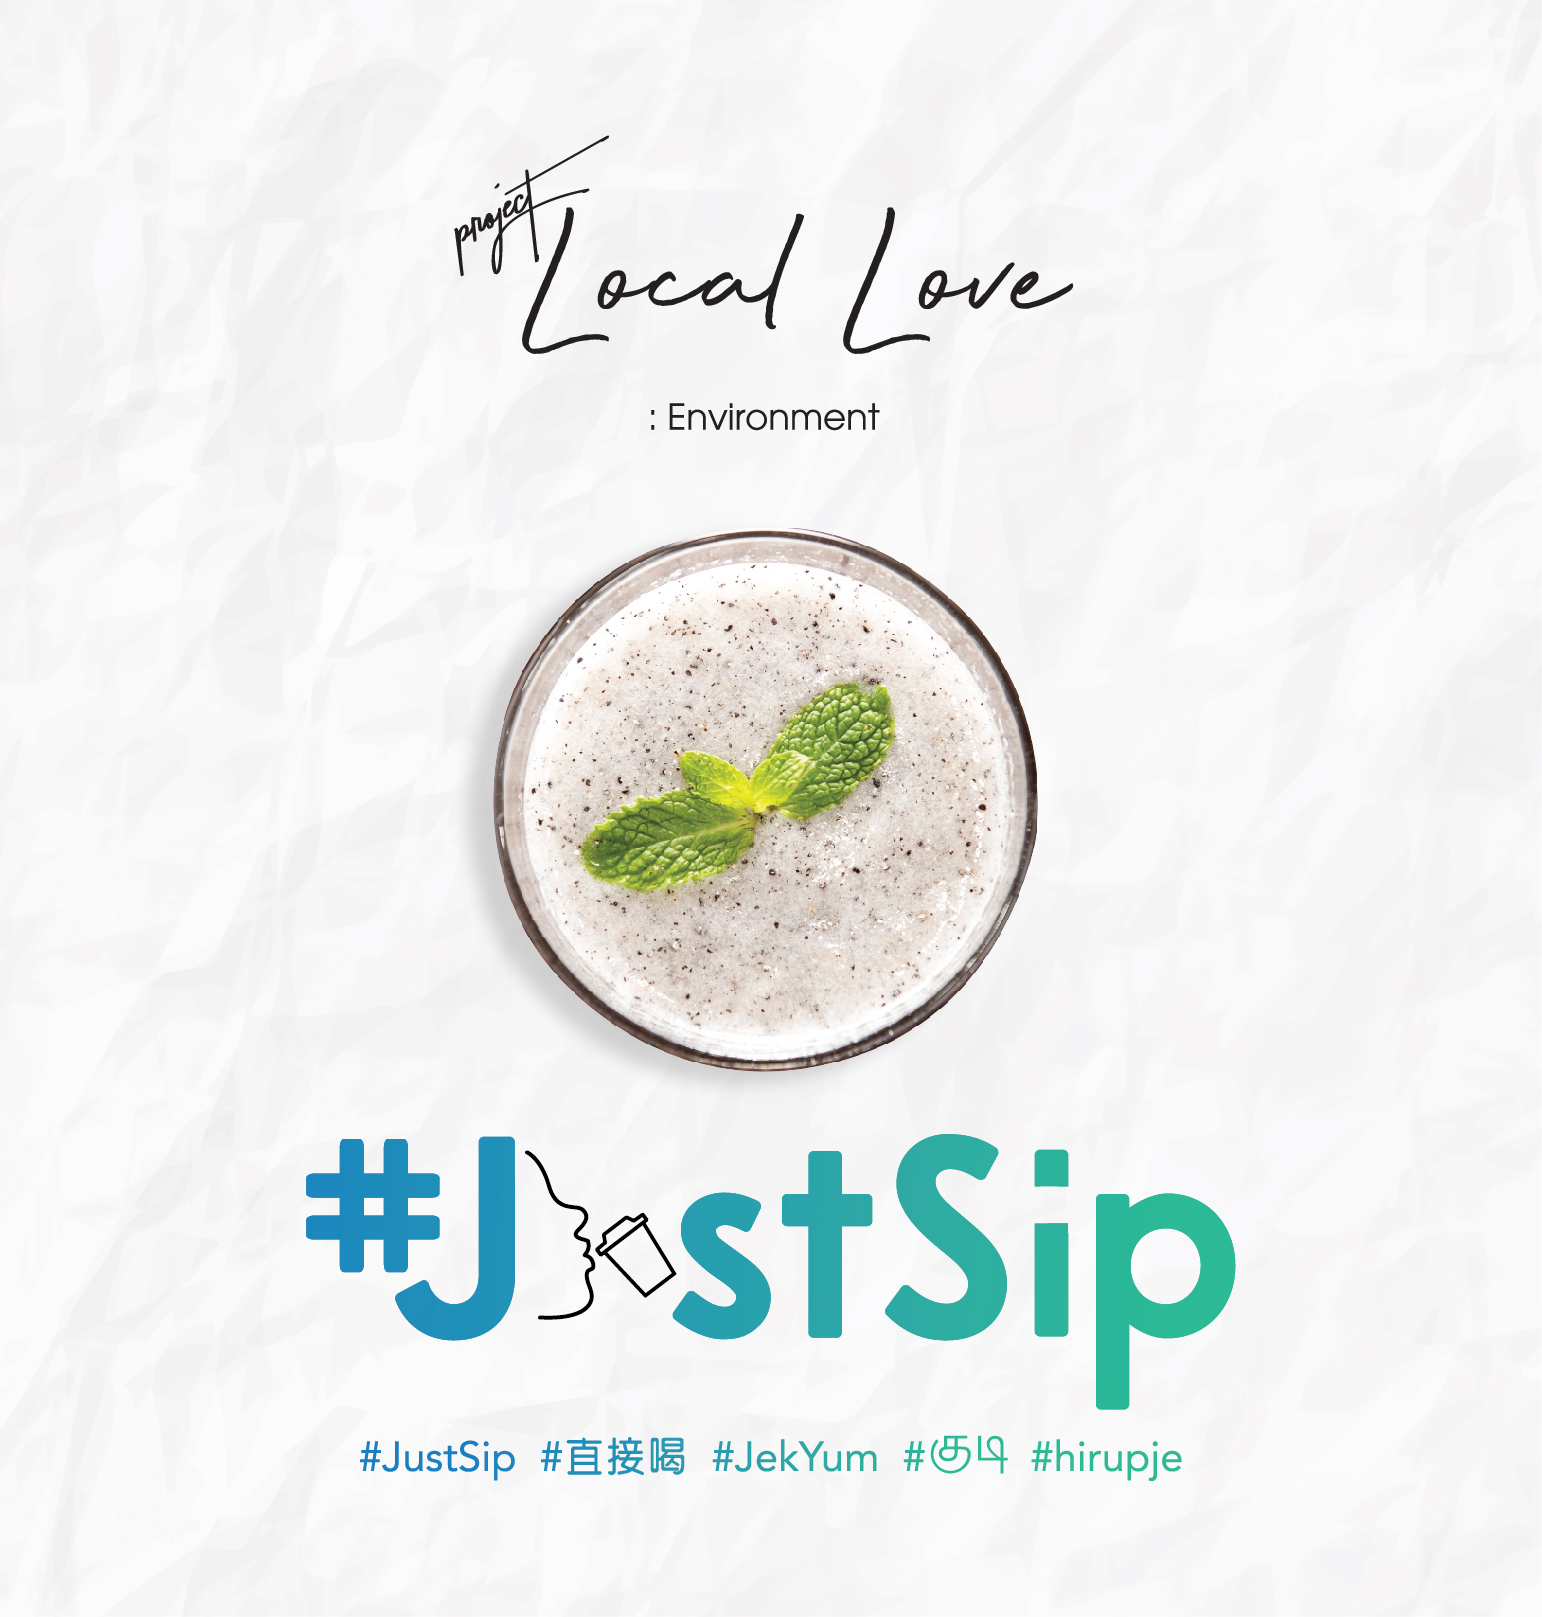 Care Luxury Hotels & Resorts Go Straw-less with #JustSip Campaign